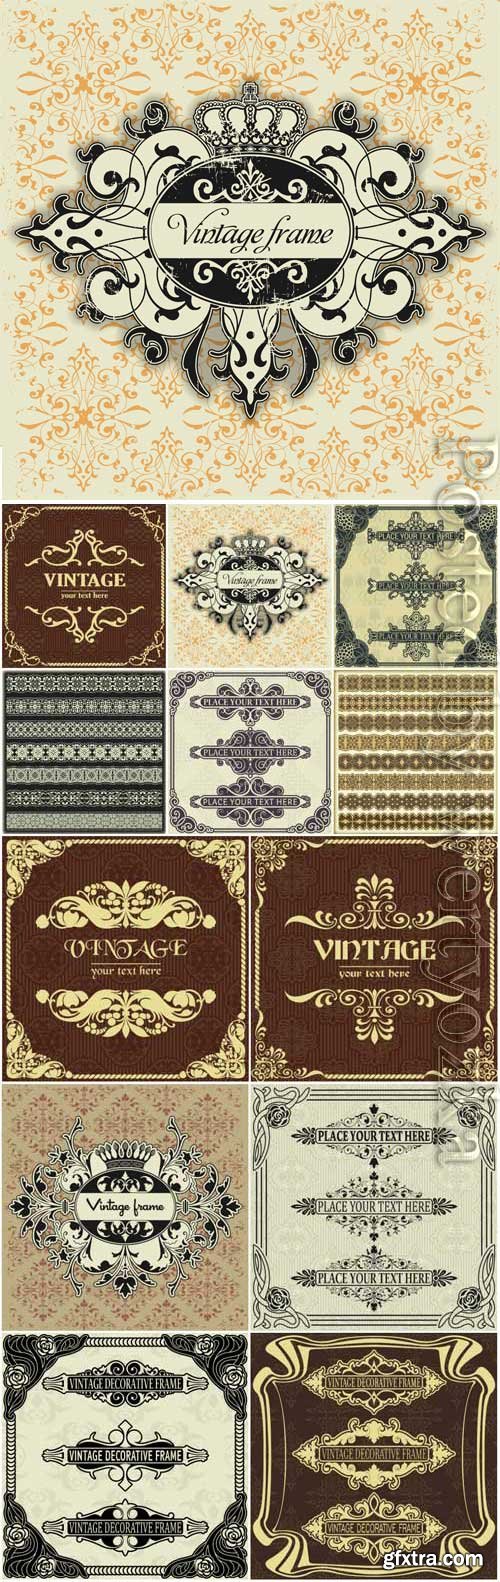 Frames and vintage backgrounds in vector